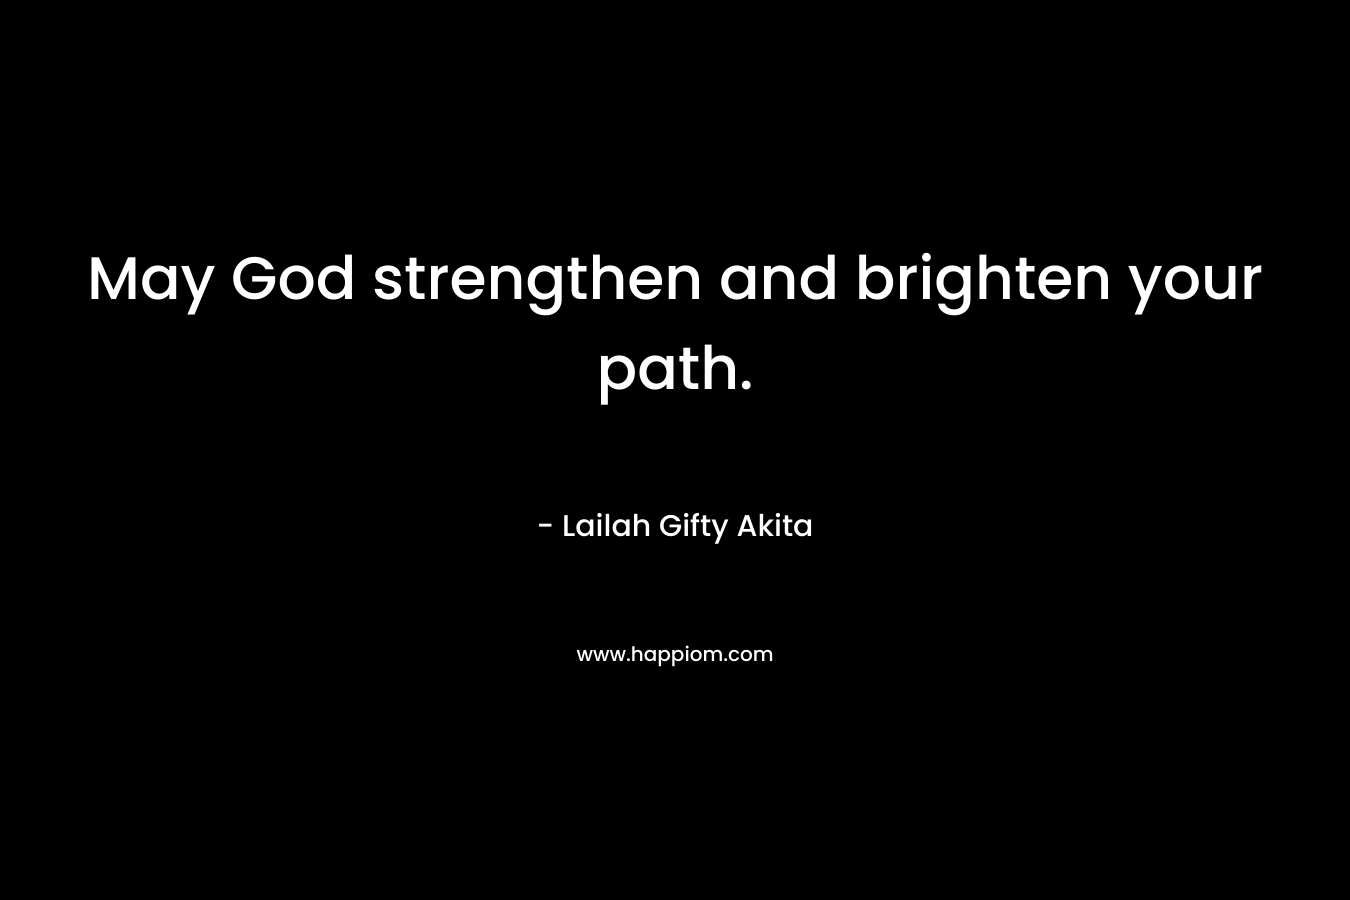 May God strengthen and brighten your path. – Lailah Gifty Akita